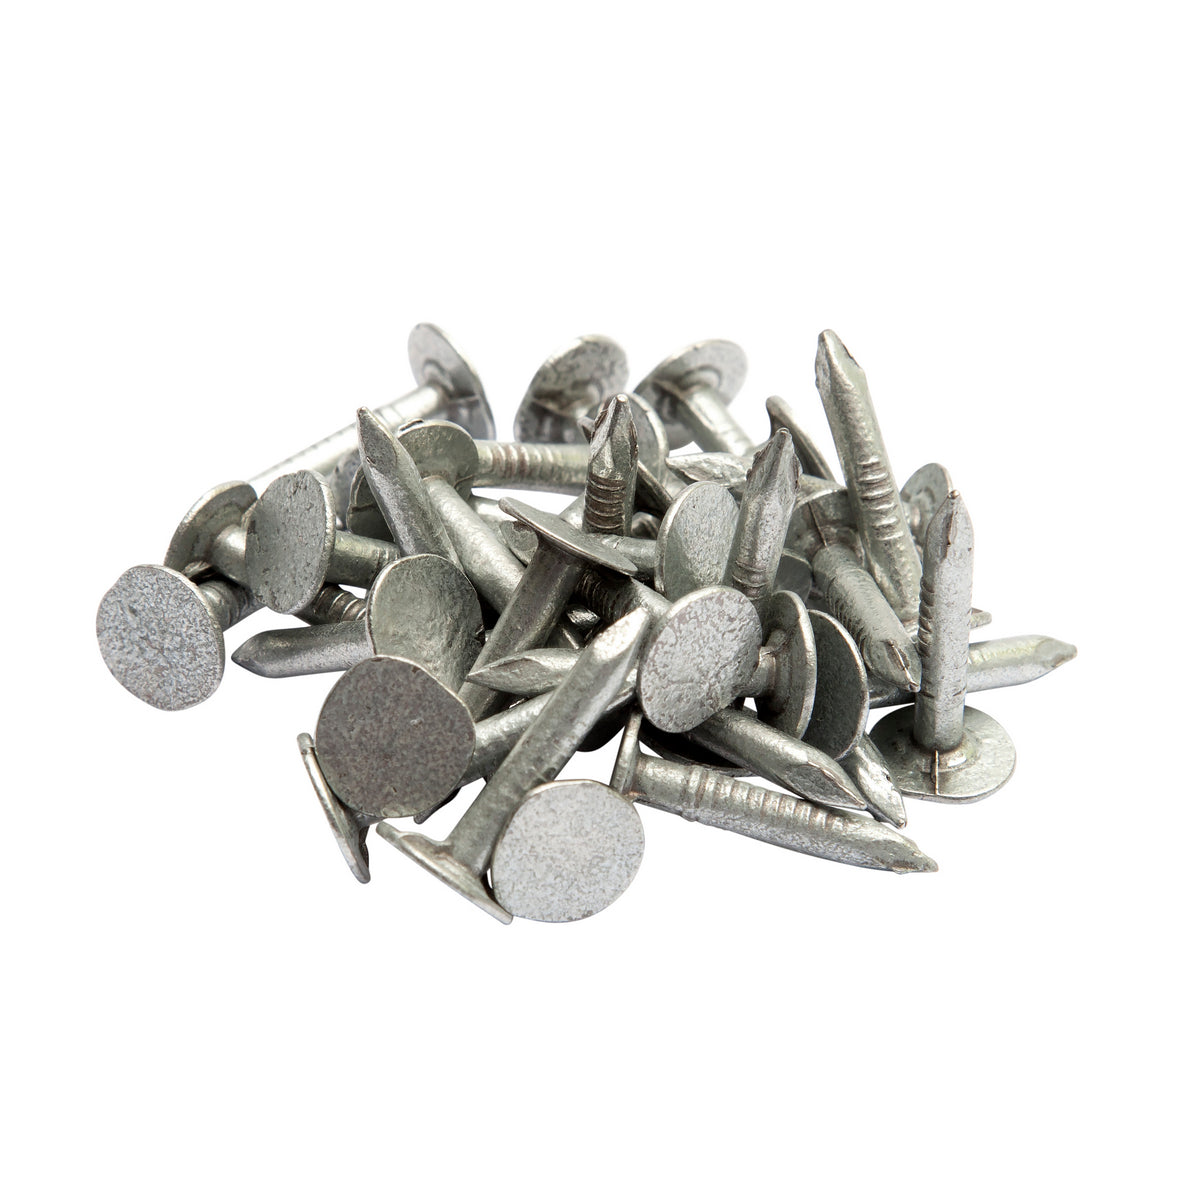 Galvanised ELH Clout Nails  - 20 mm x 3 mm